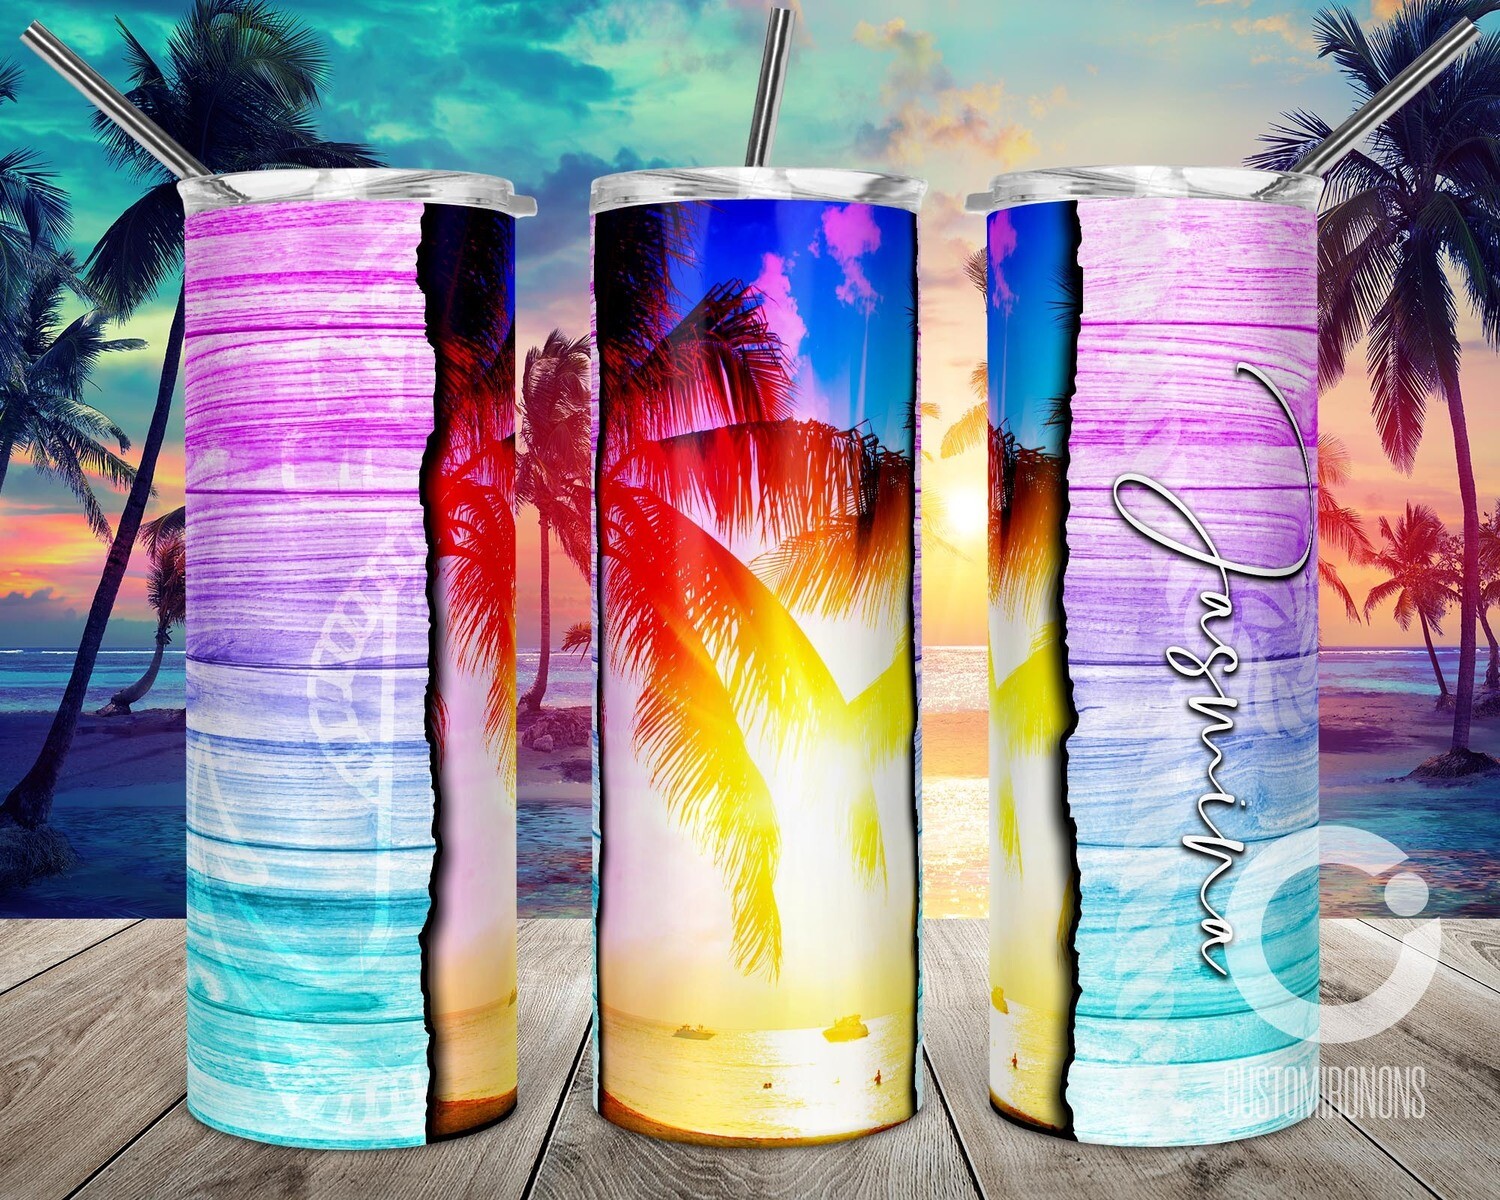 Pink to Blue Ocean Vibes sublimation design - Sublimation design - Sublimation - DTG printing - Sublimation design download - Summer sublimation design